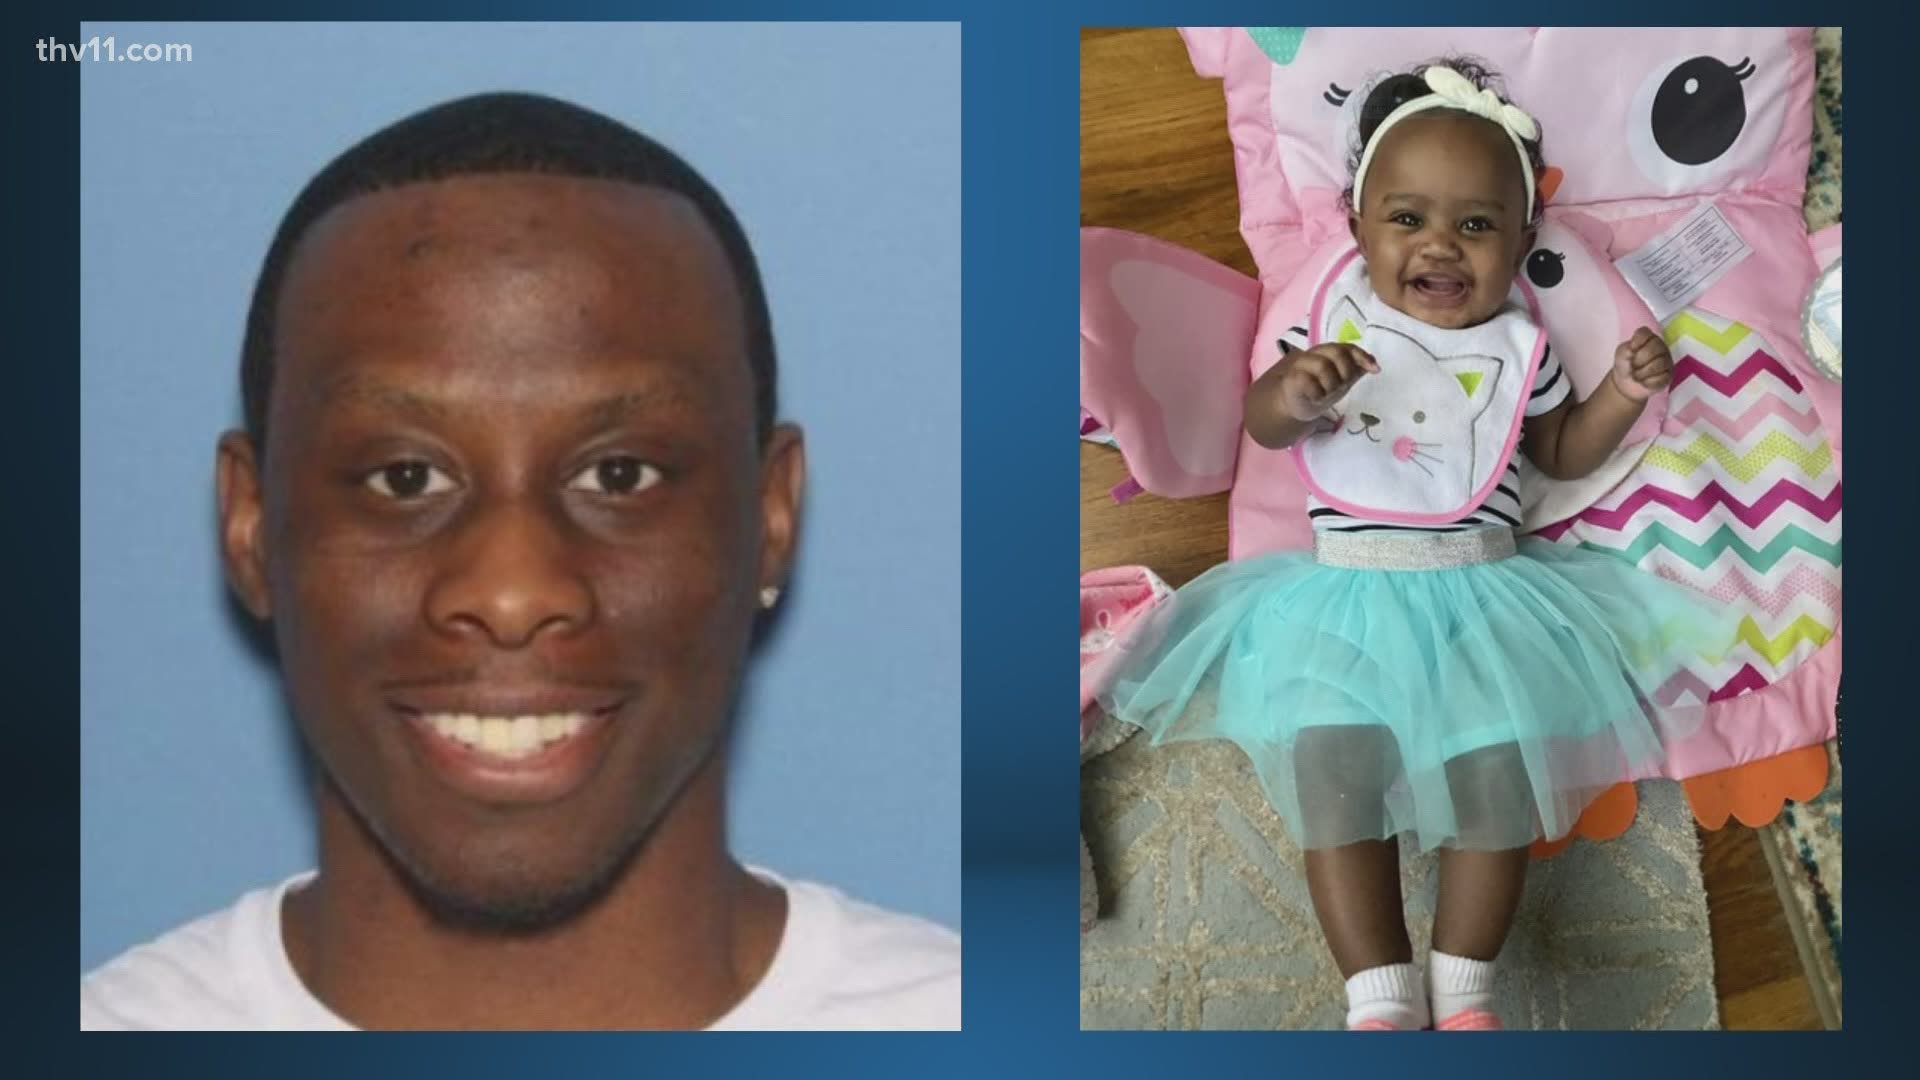 Police say they are searching for 6-month-old Majesty McClanton.